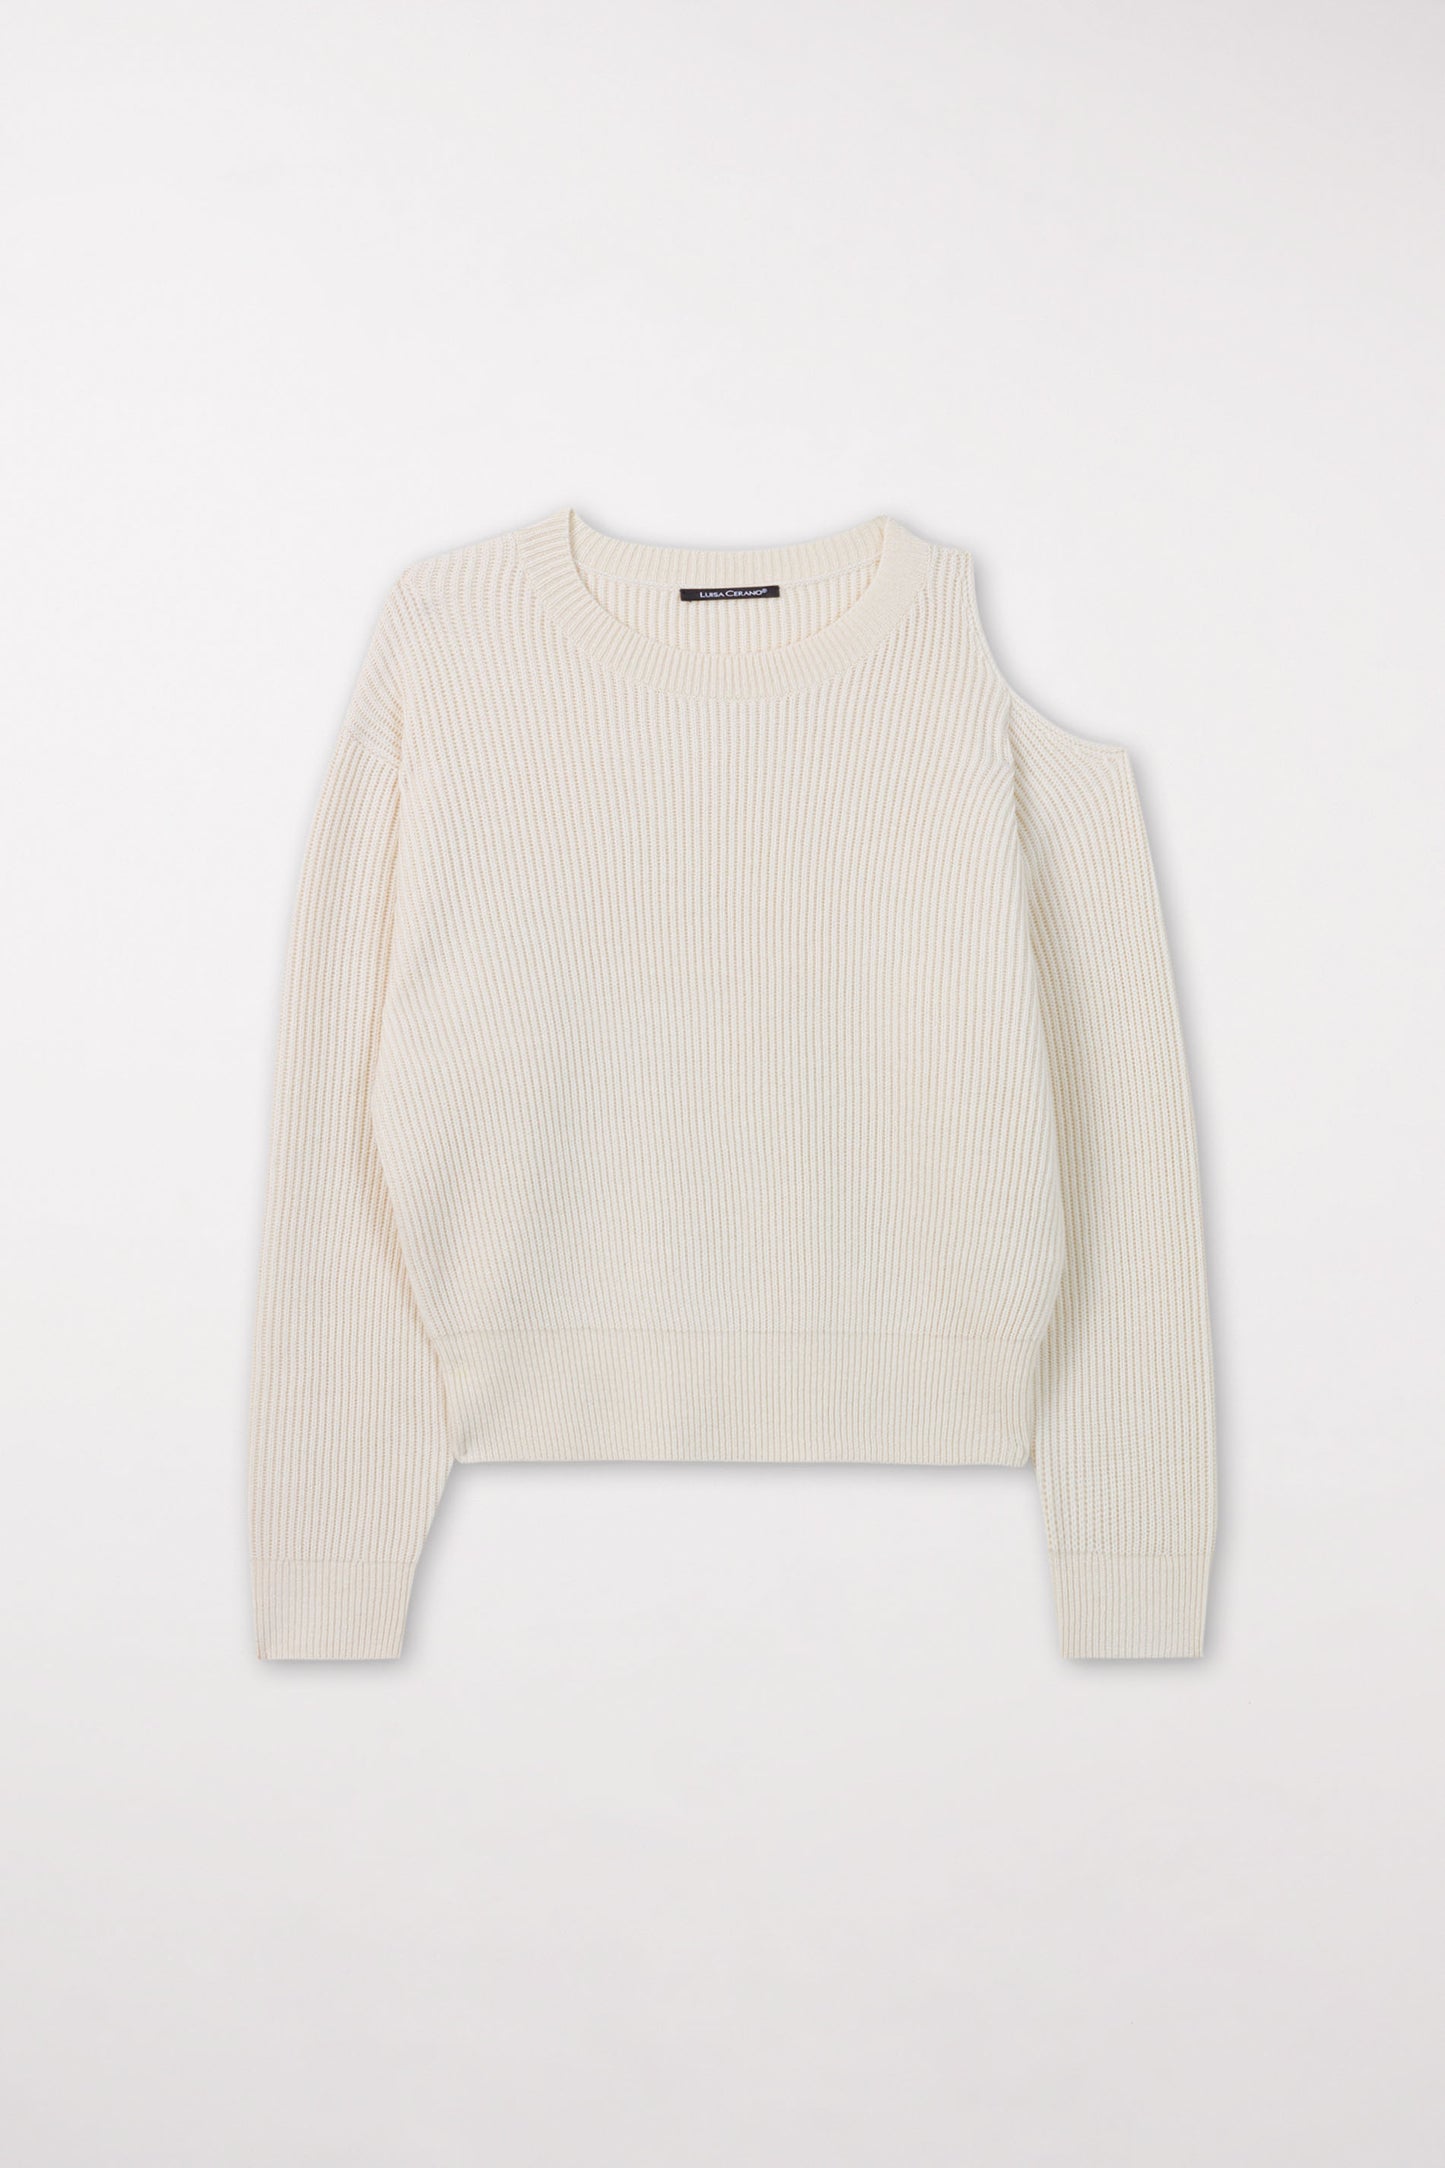 Knitted Sweater with A Cut-out on the Left Shoulder